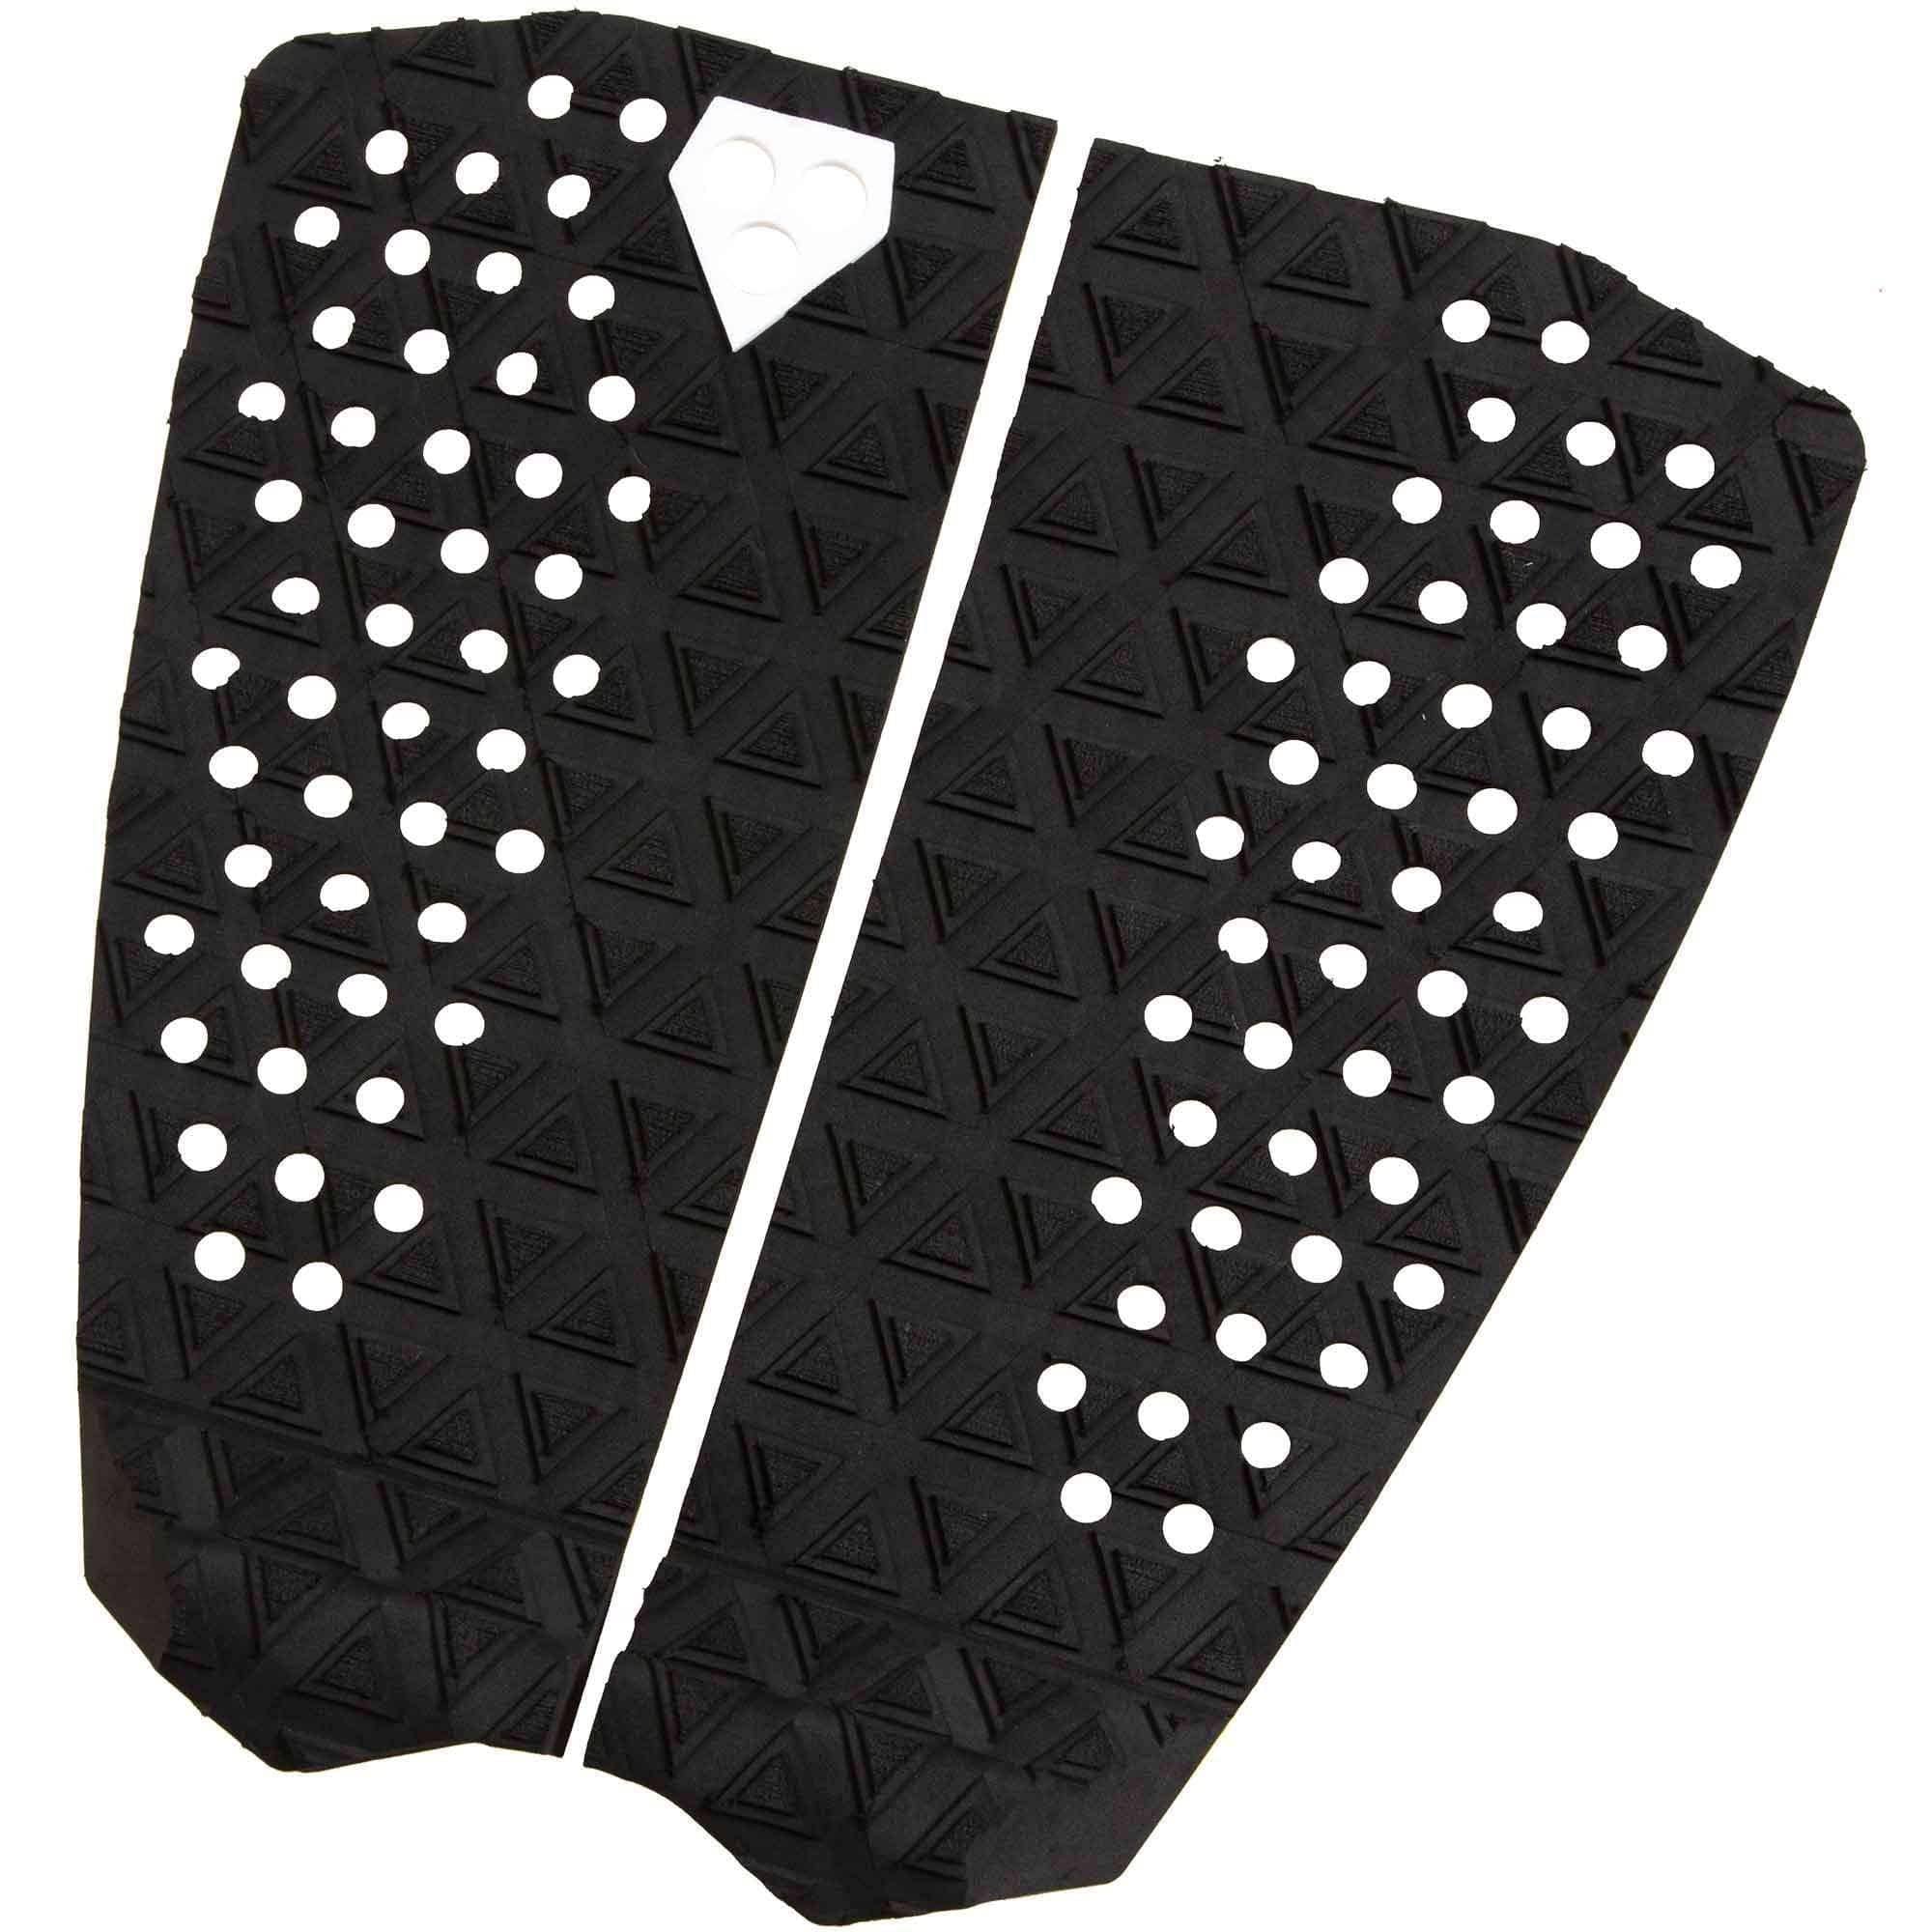 Gorilla Dos Black Surfboard Tail Pad 2 Piece Tail Pad by Gorilla Surf